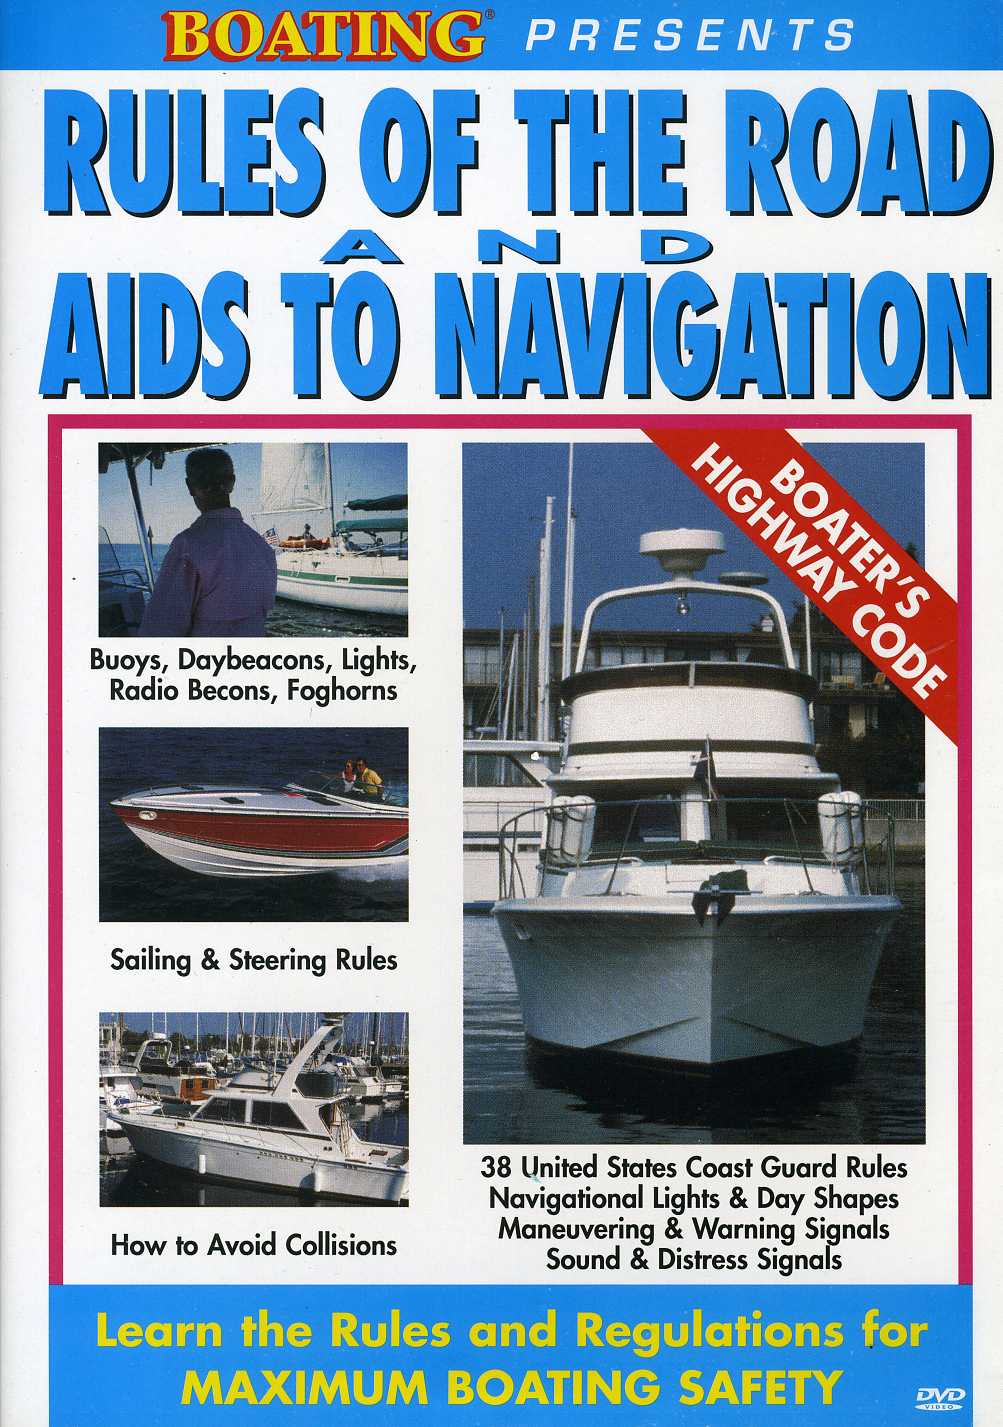 RULES OF THE ROAD & AIDS TO NAVIGATION